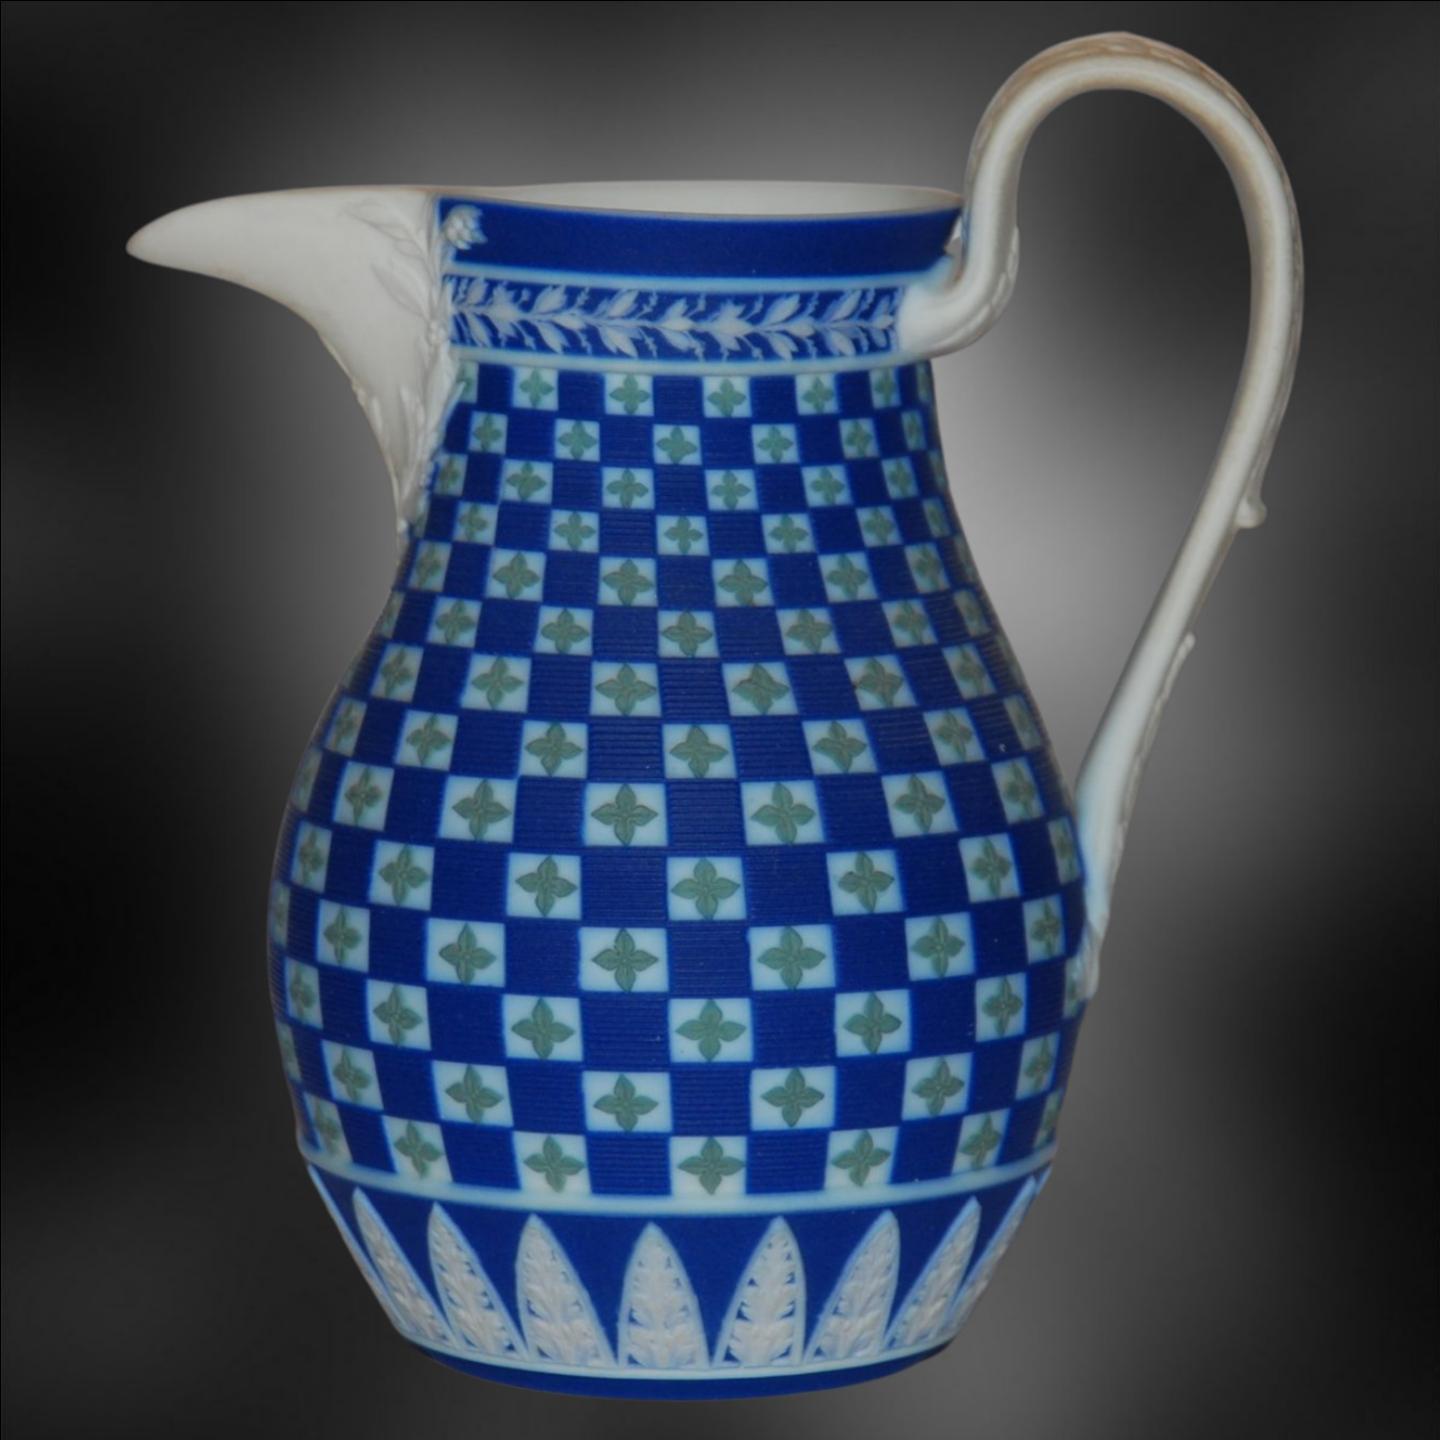 Superb and exceptionally rare small jug in tricolour engine-turned diceware.

This is very early jasperware, made when 